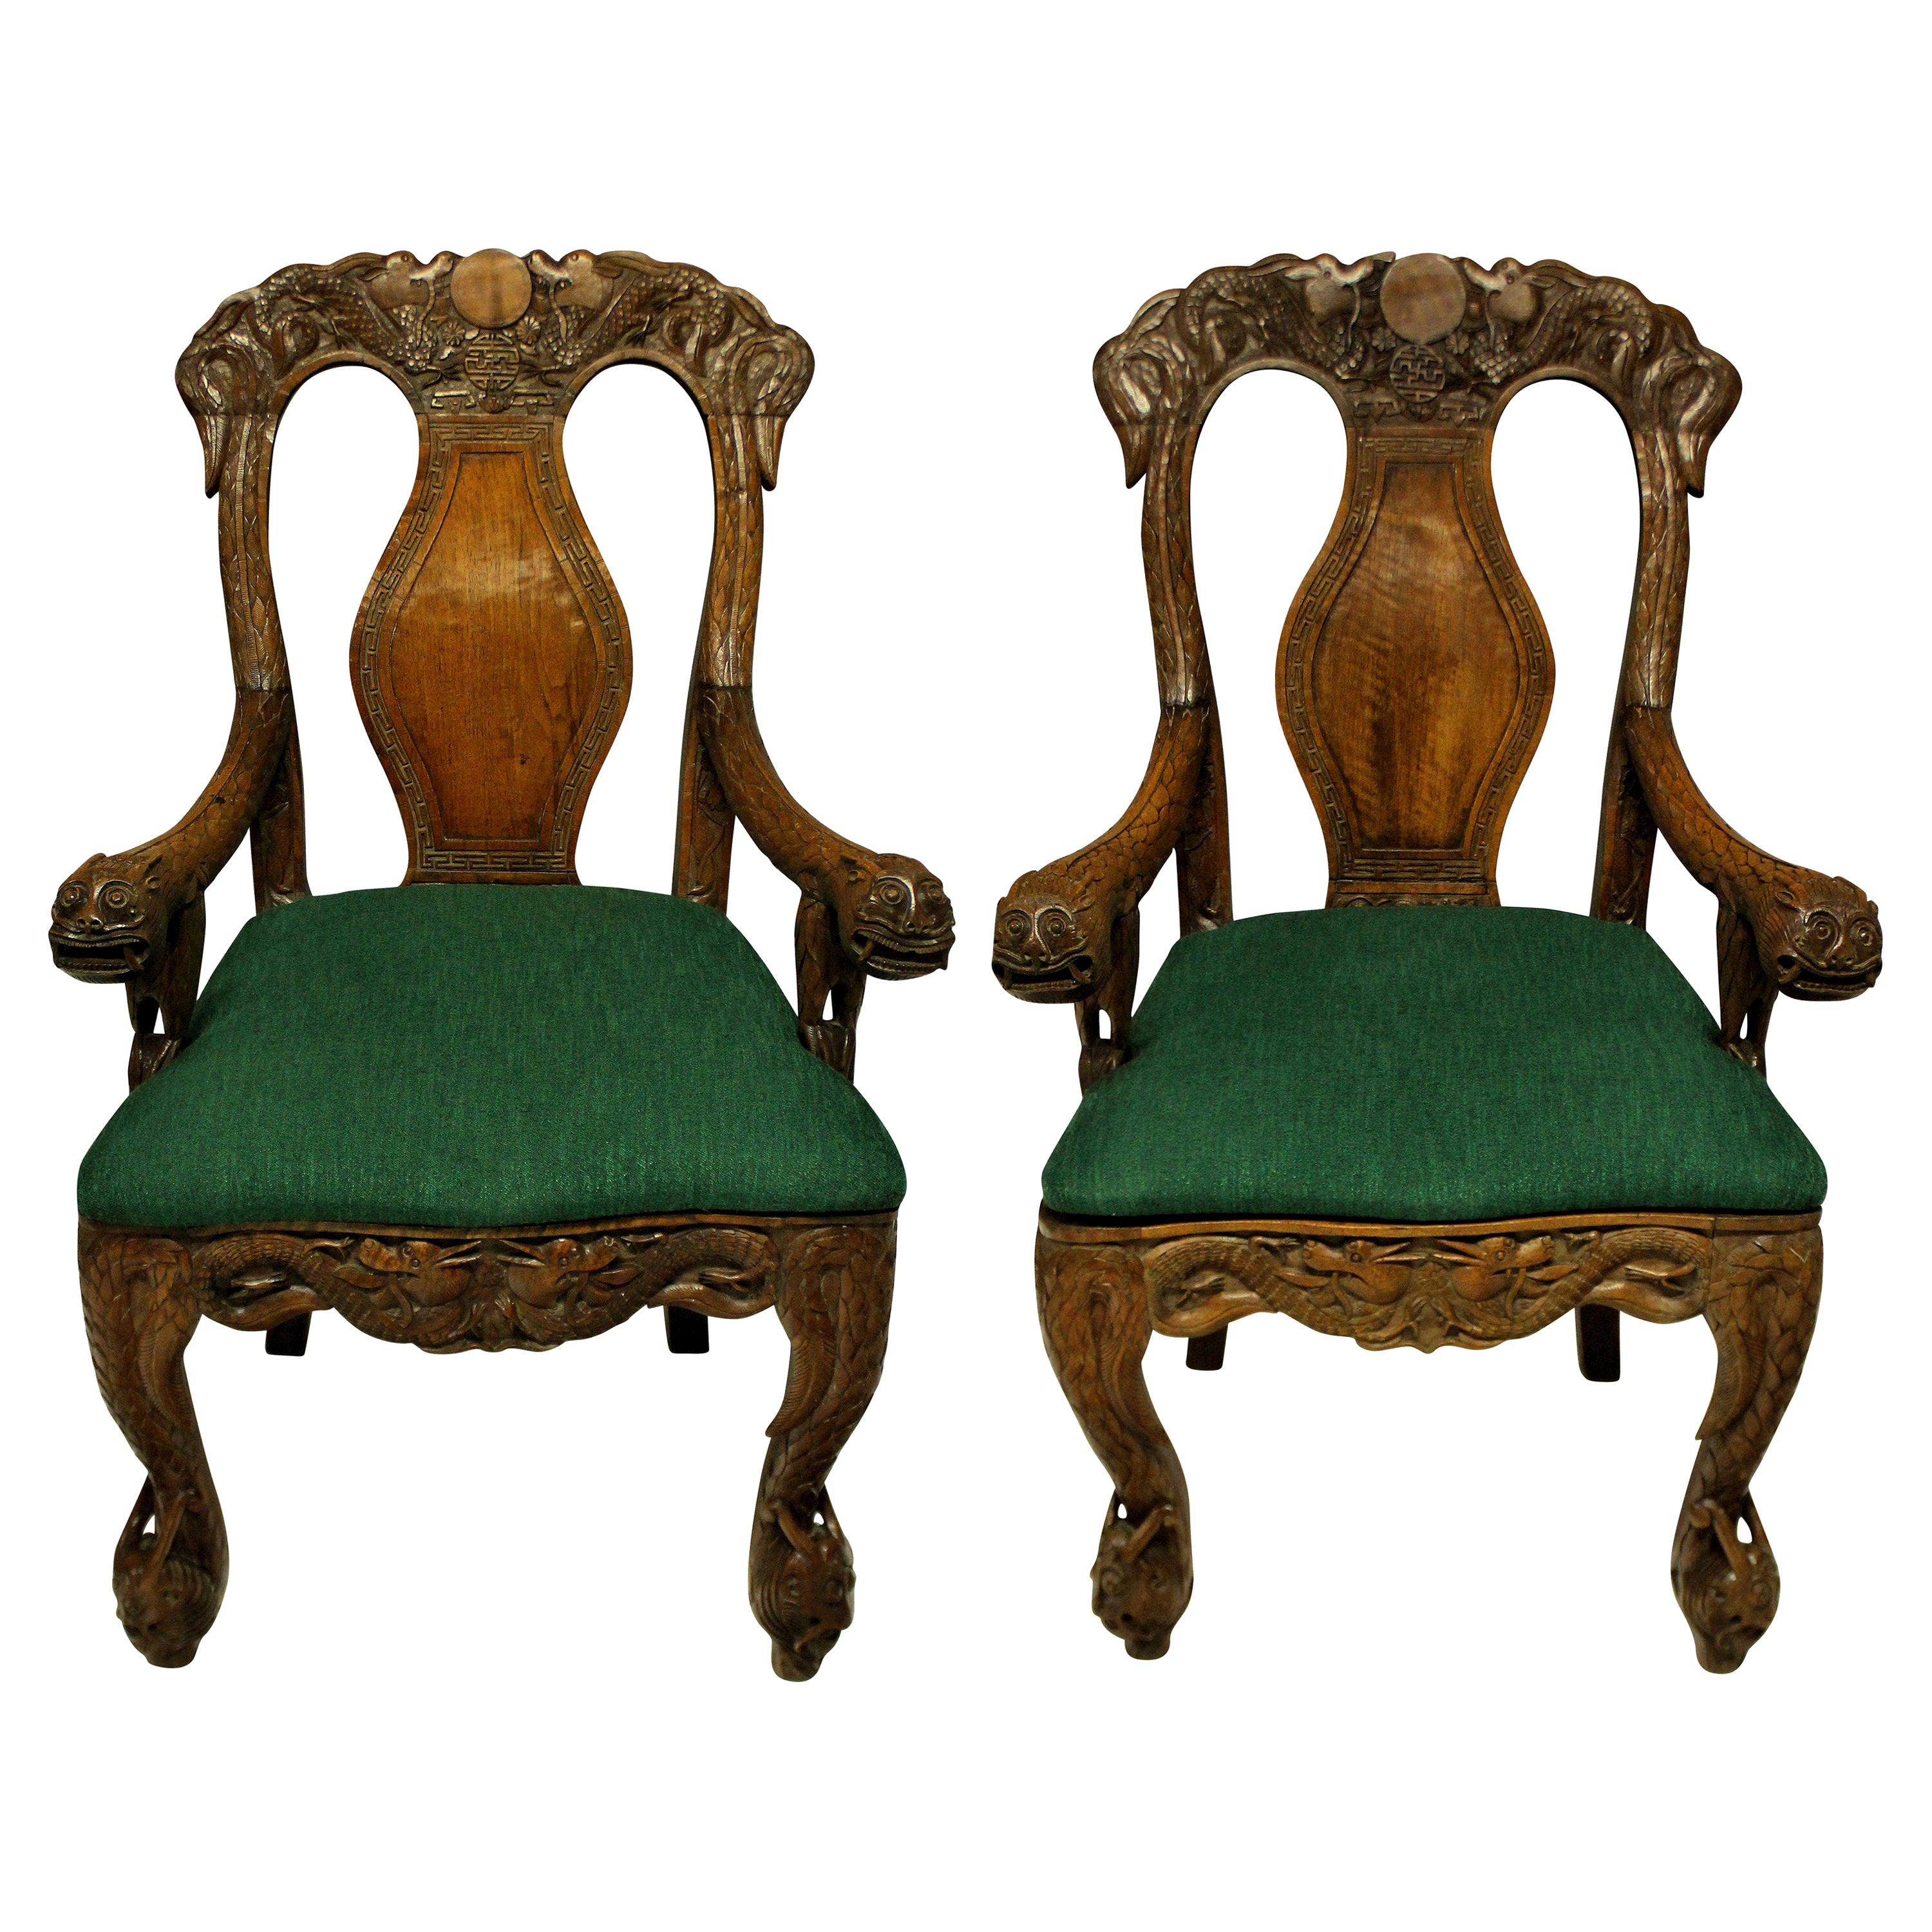 Pair of Finely Carved 19th Century Chinese Armchairs